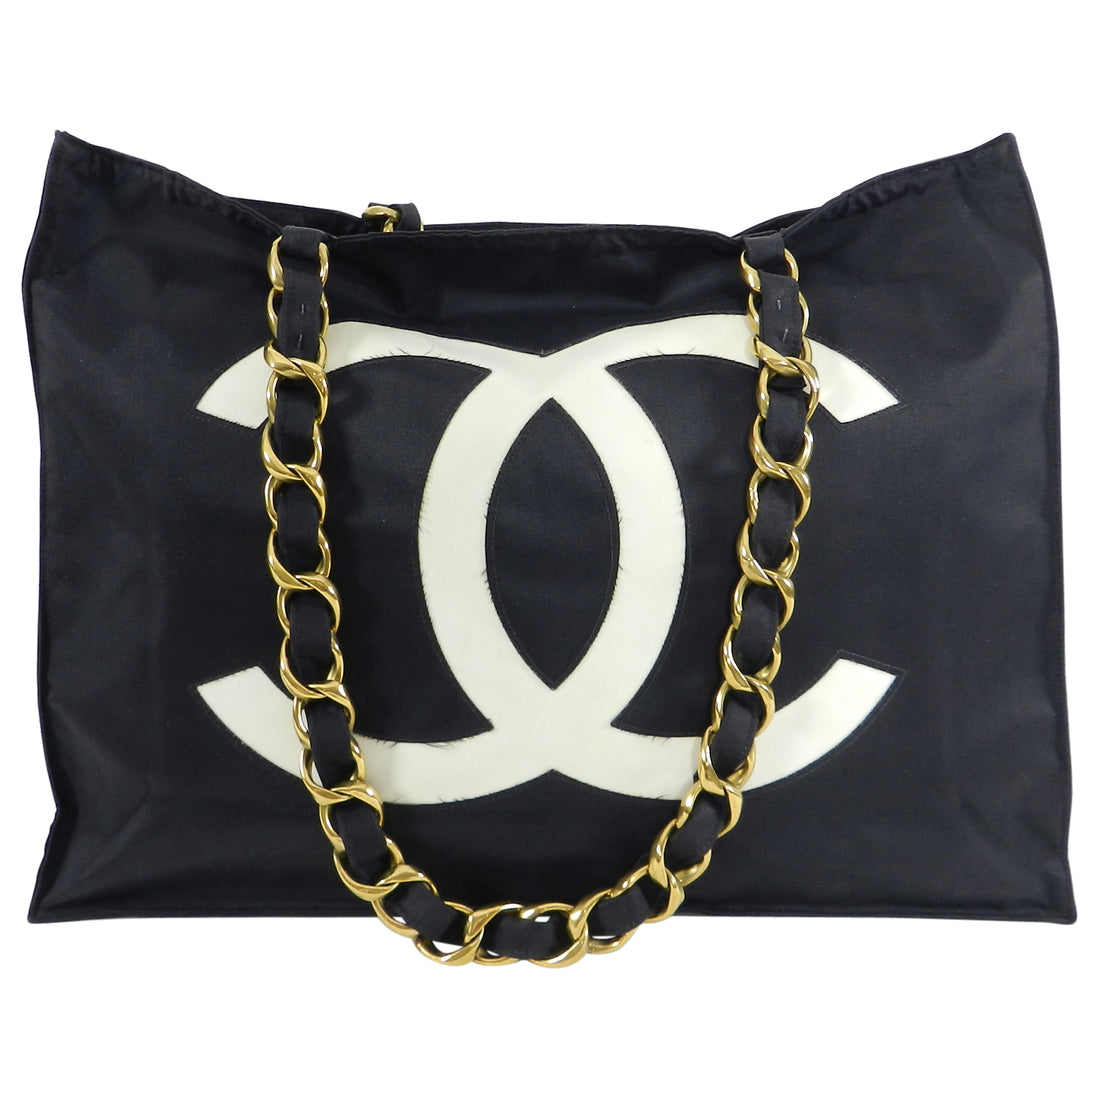 Chanel Black x White Gold Chain Tote Bag 1028c19 – Bagriculture